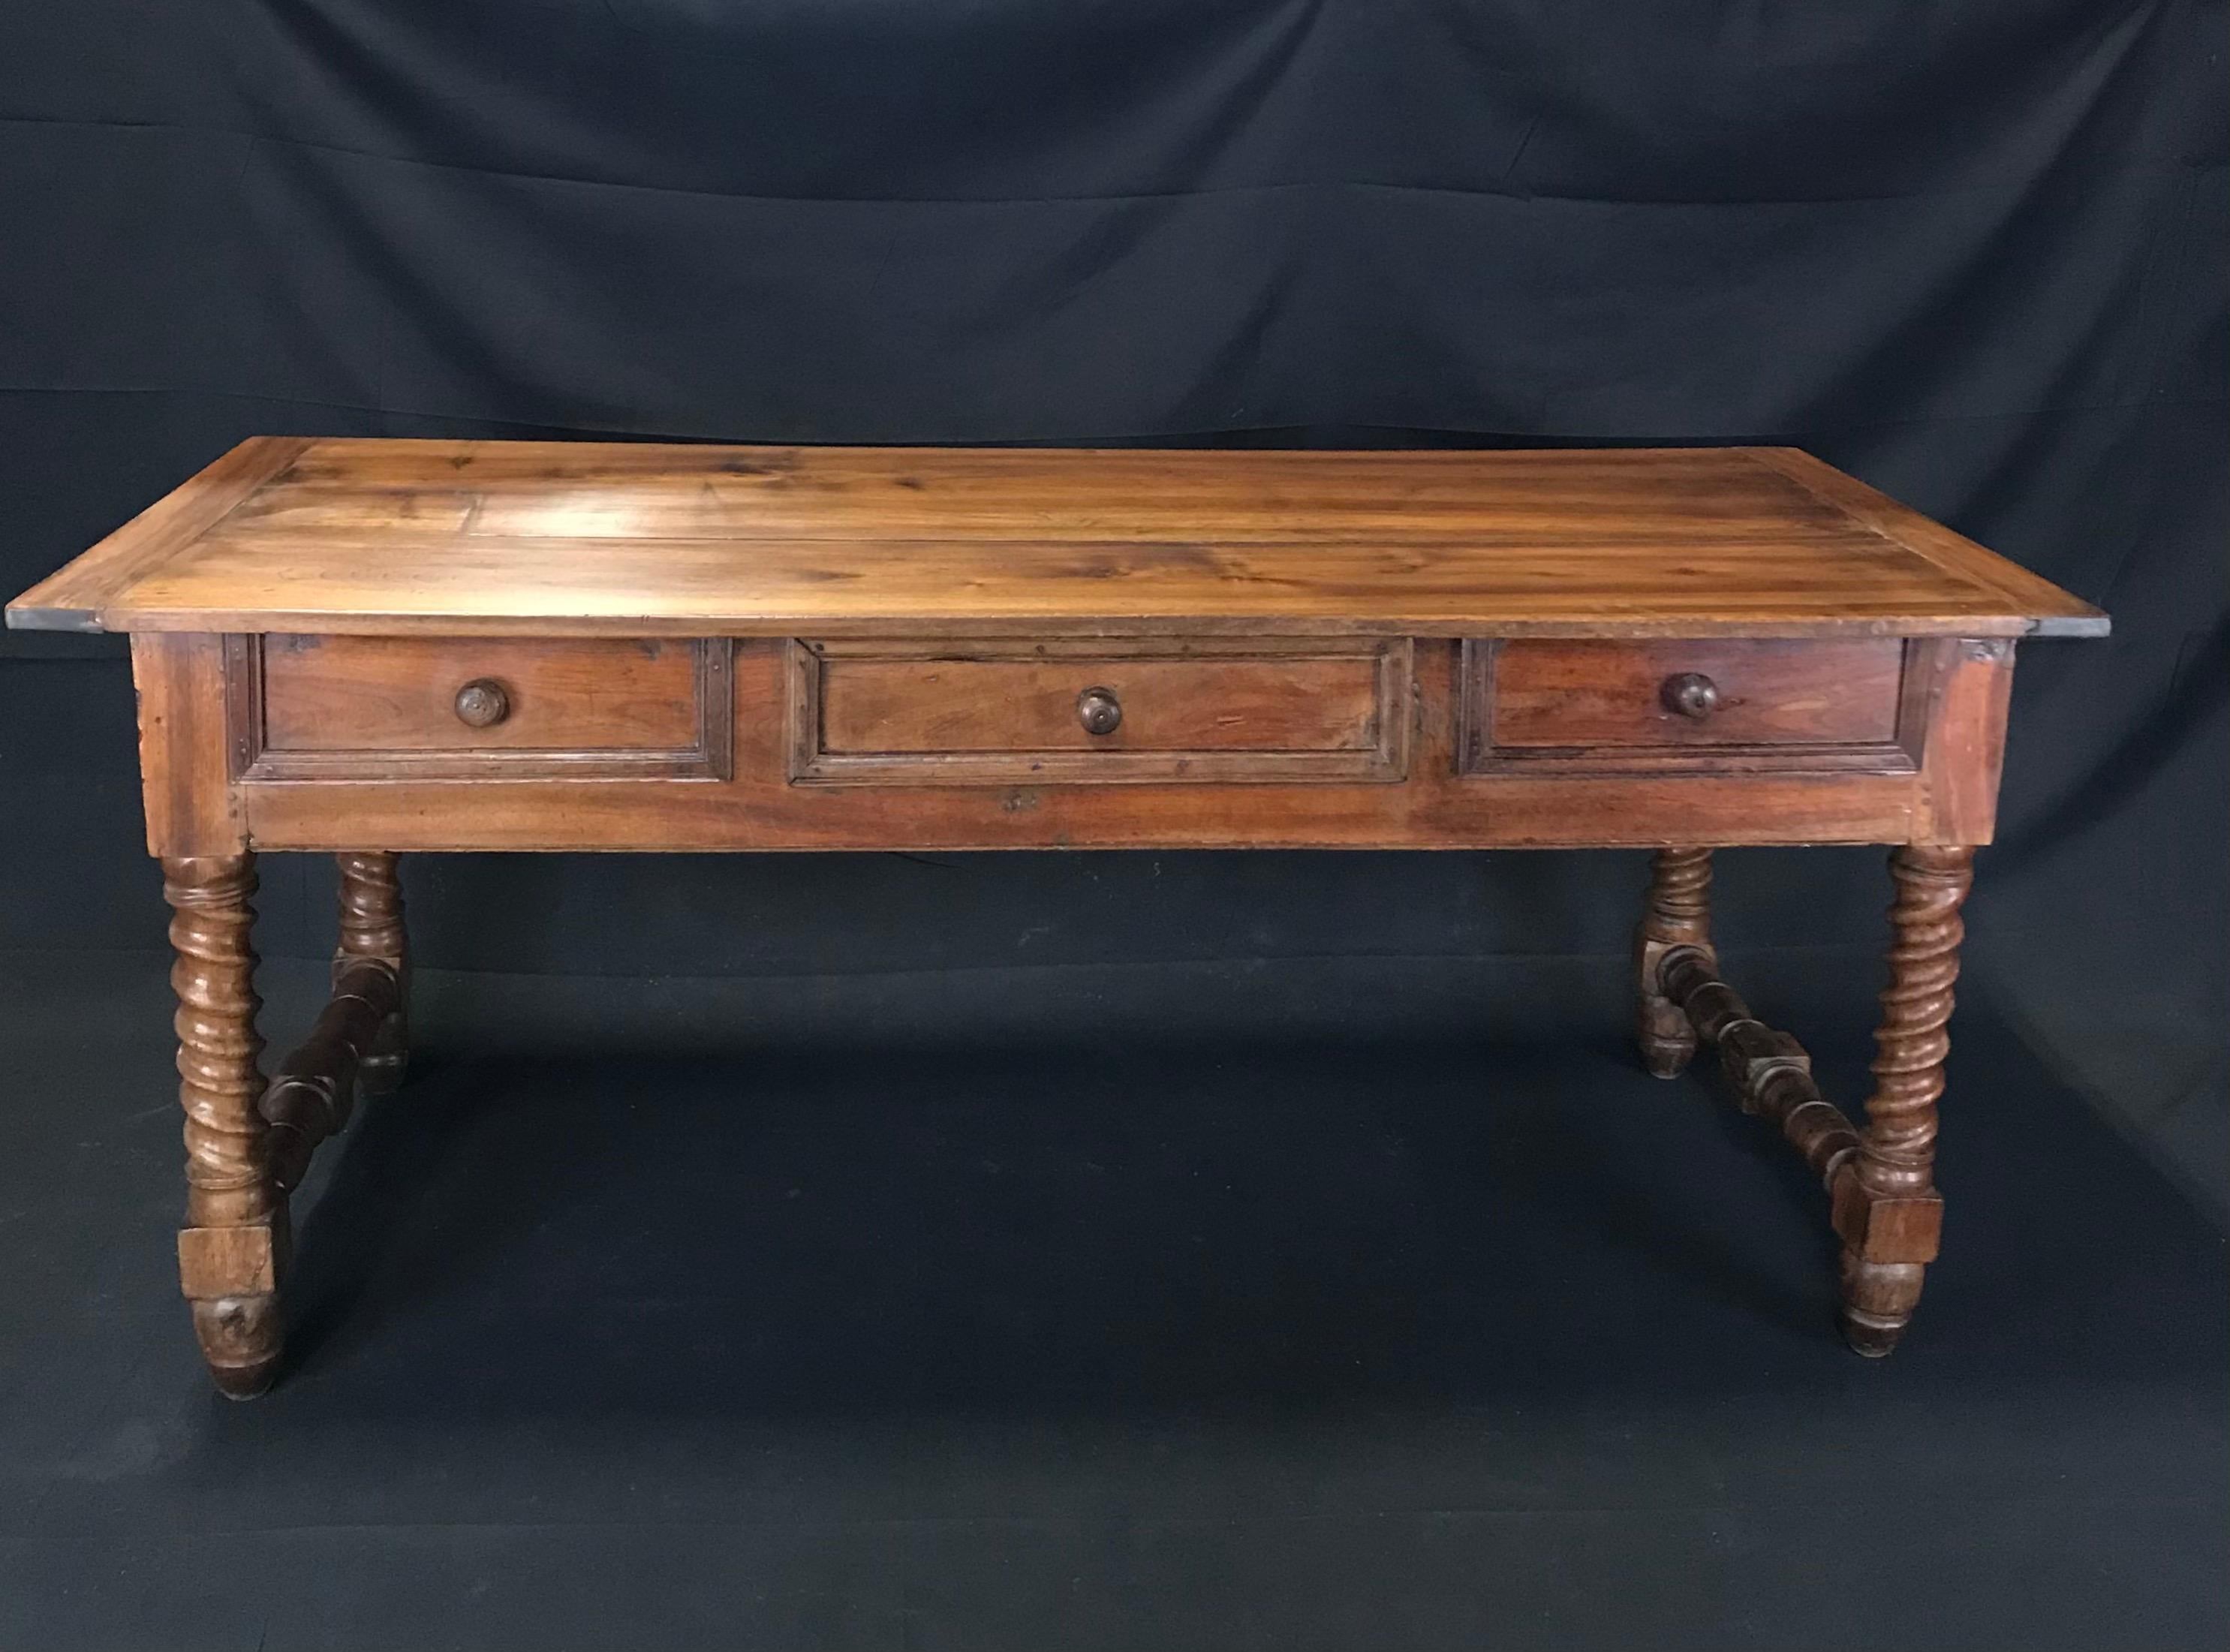 Handsome, rustic and sturdy French country walnut farm table with single center drawer and impressive barley twist legs. Beautiful solid two-plank top with breadboard ends on top of one center working drawer and four side molded faux drawers adds